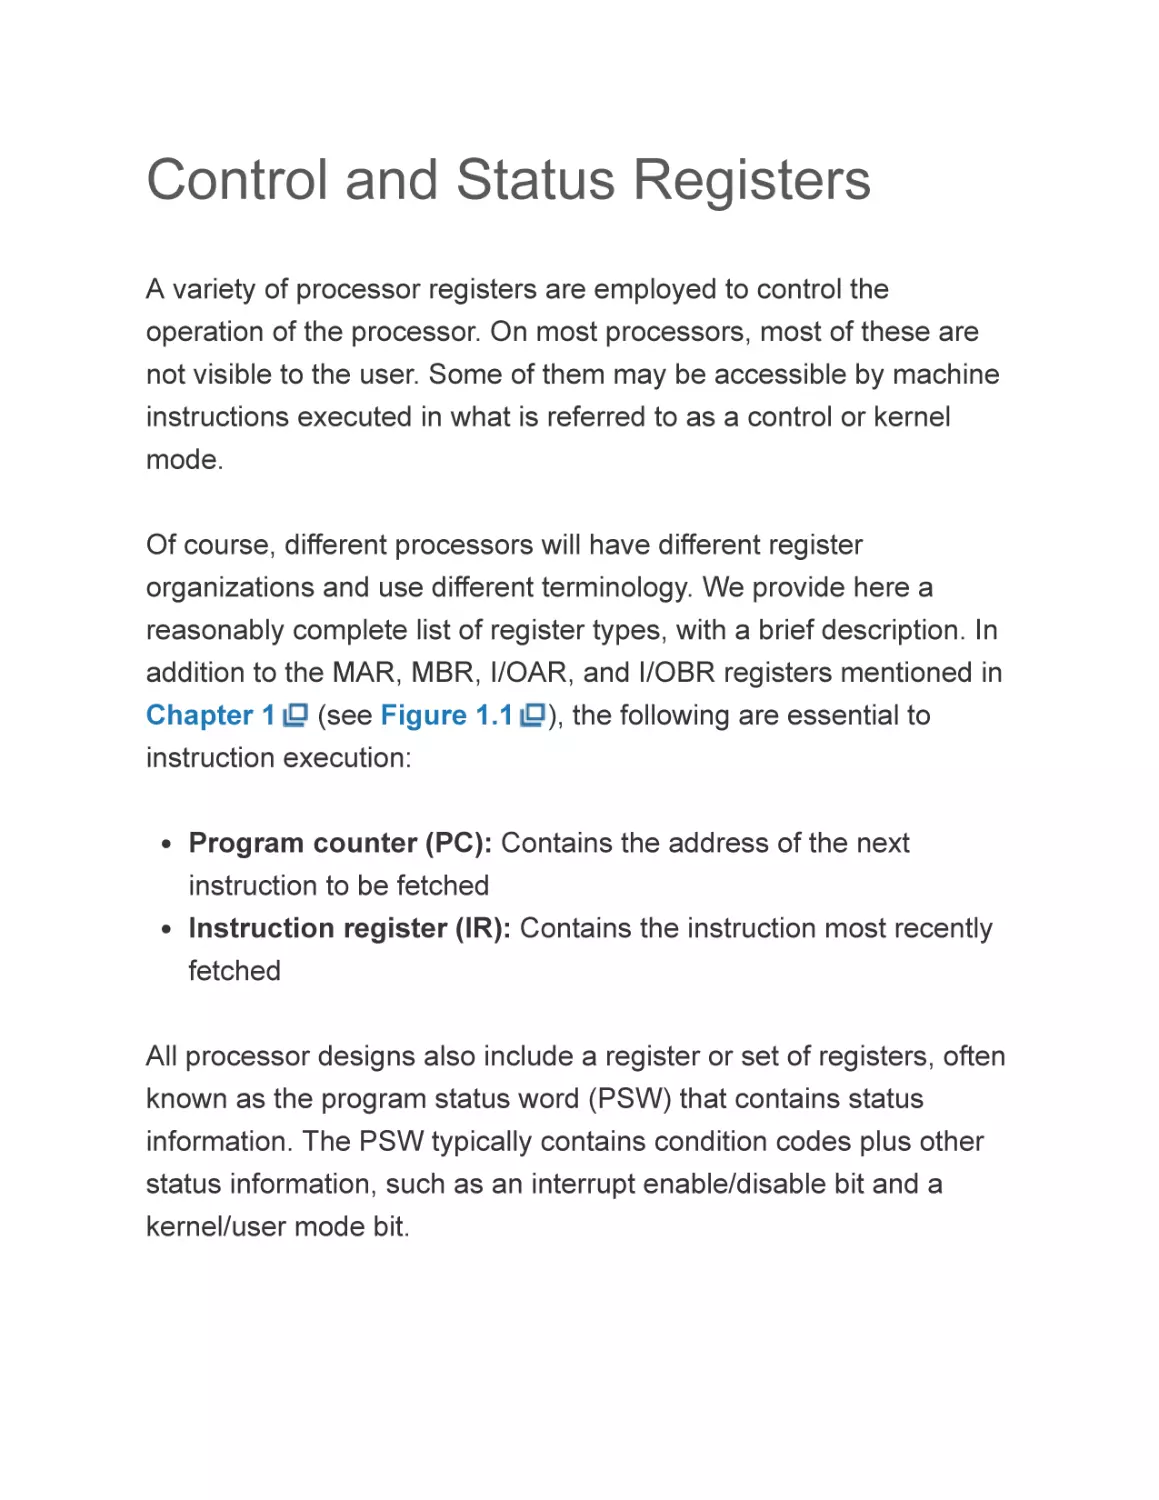 Control and Status Registers